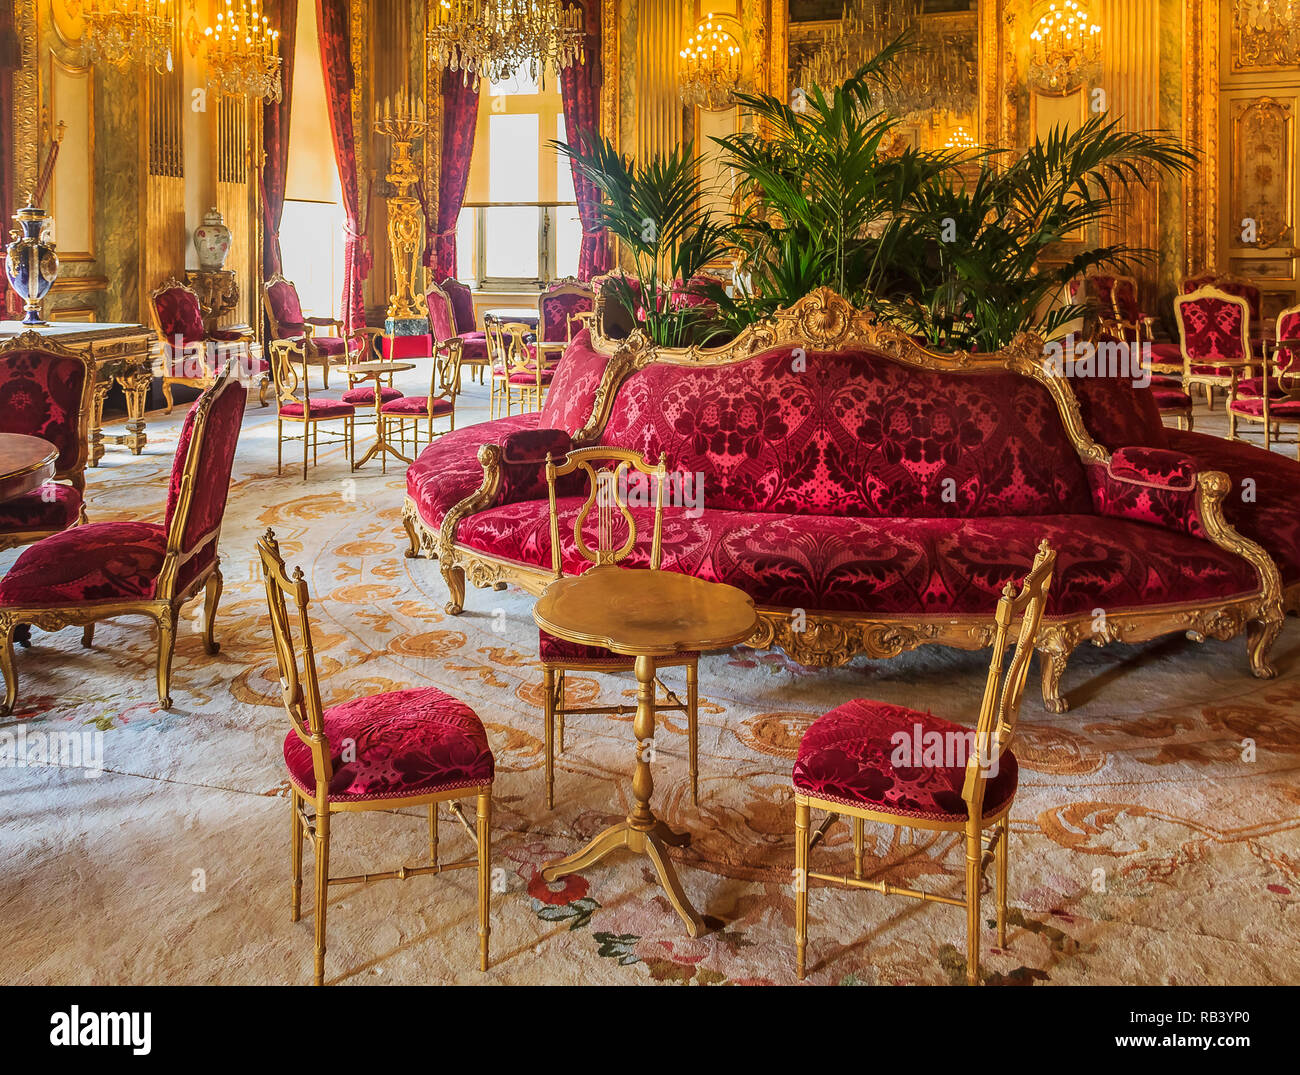 Paris, France - October 25, 2013: Interior of the apartments of Napoleon III in Louvre Museum with luxury baroque furnishings and stunning chandeliers Stock Photo